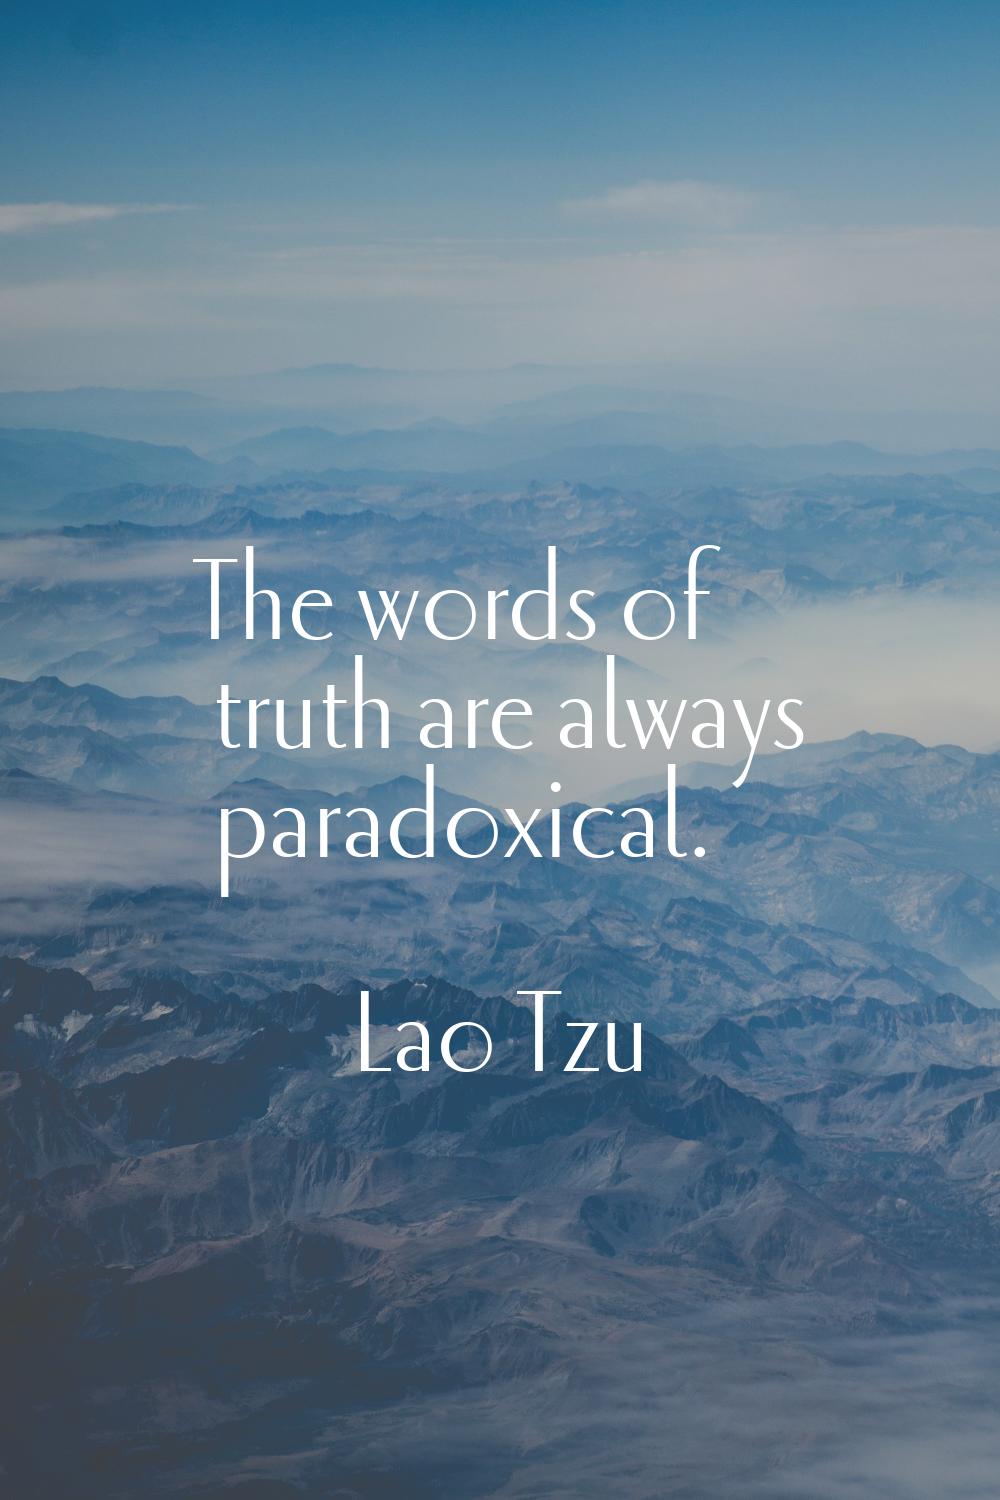 The words of truth are always paradoxical.